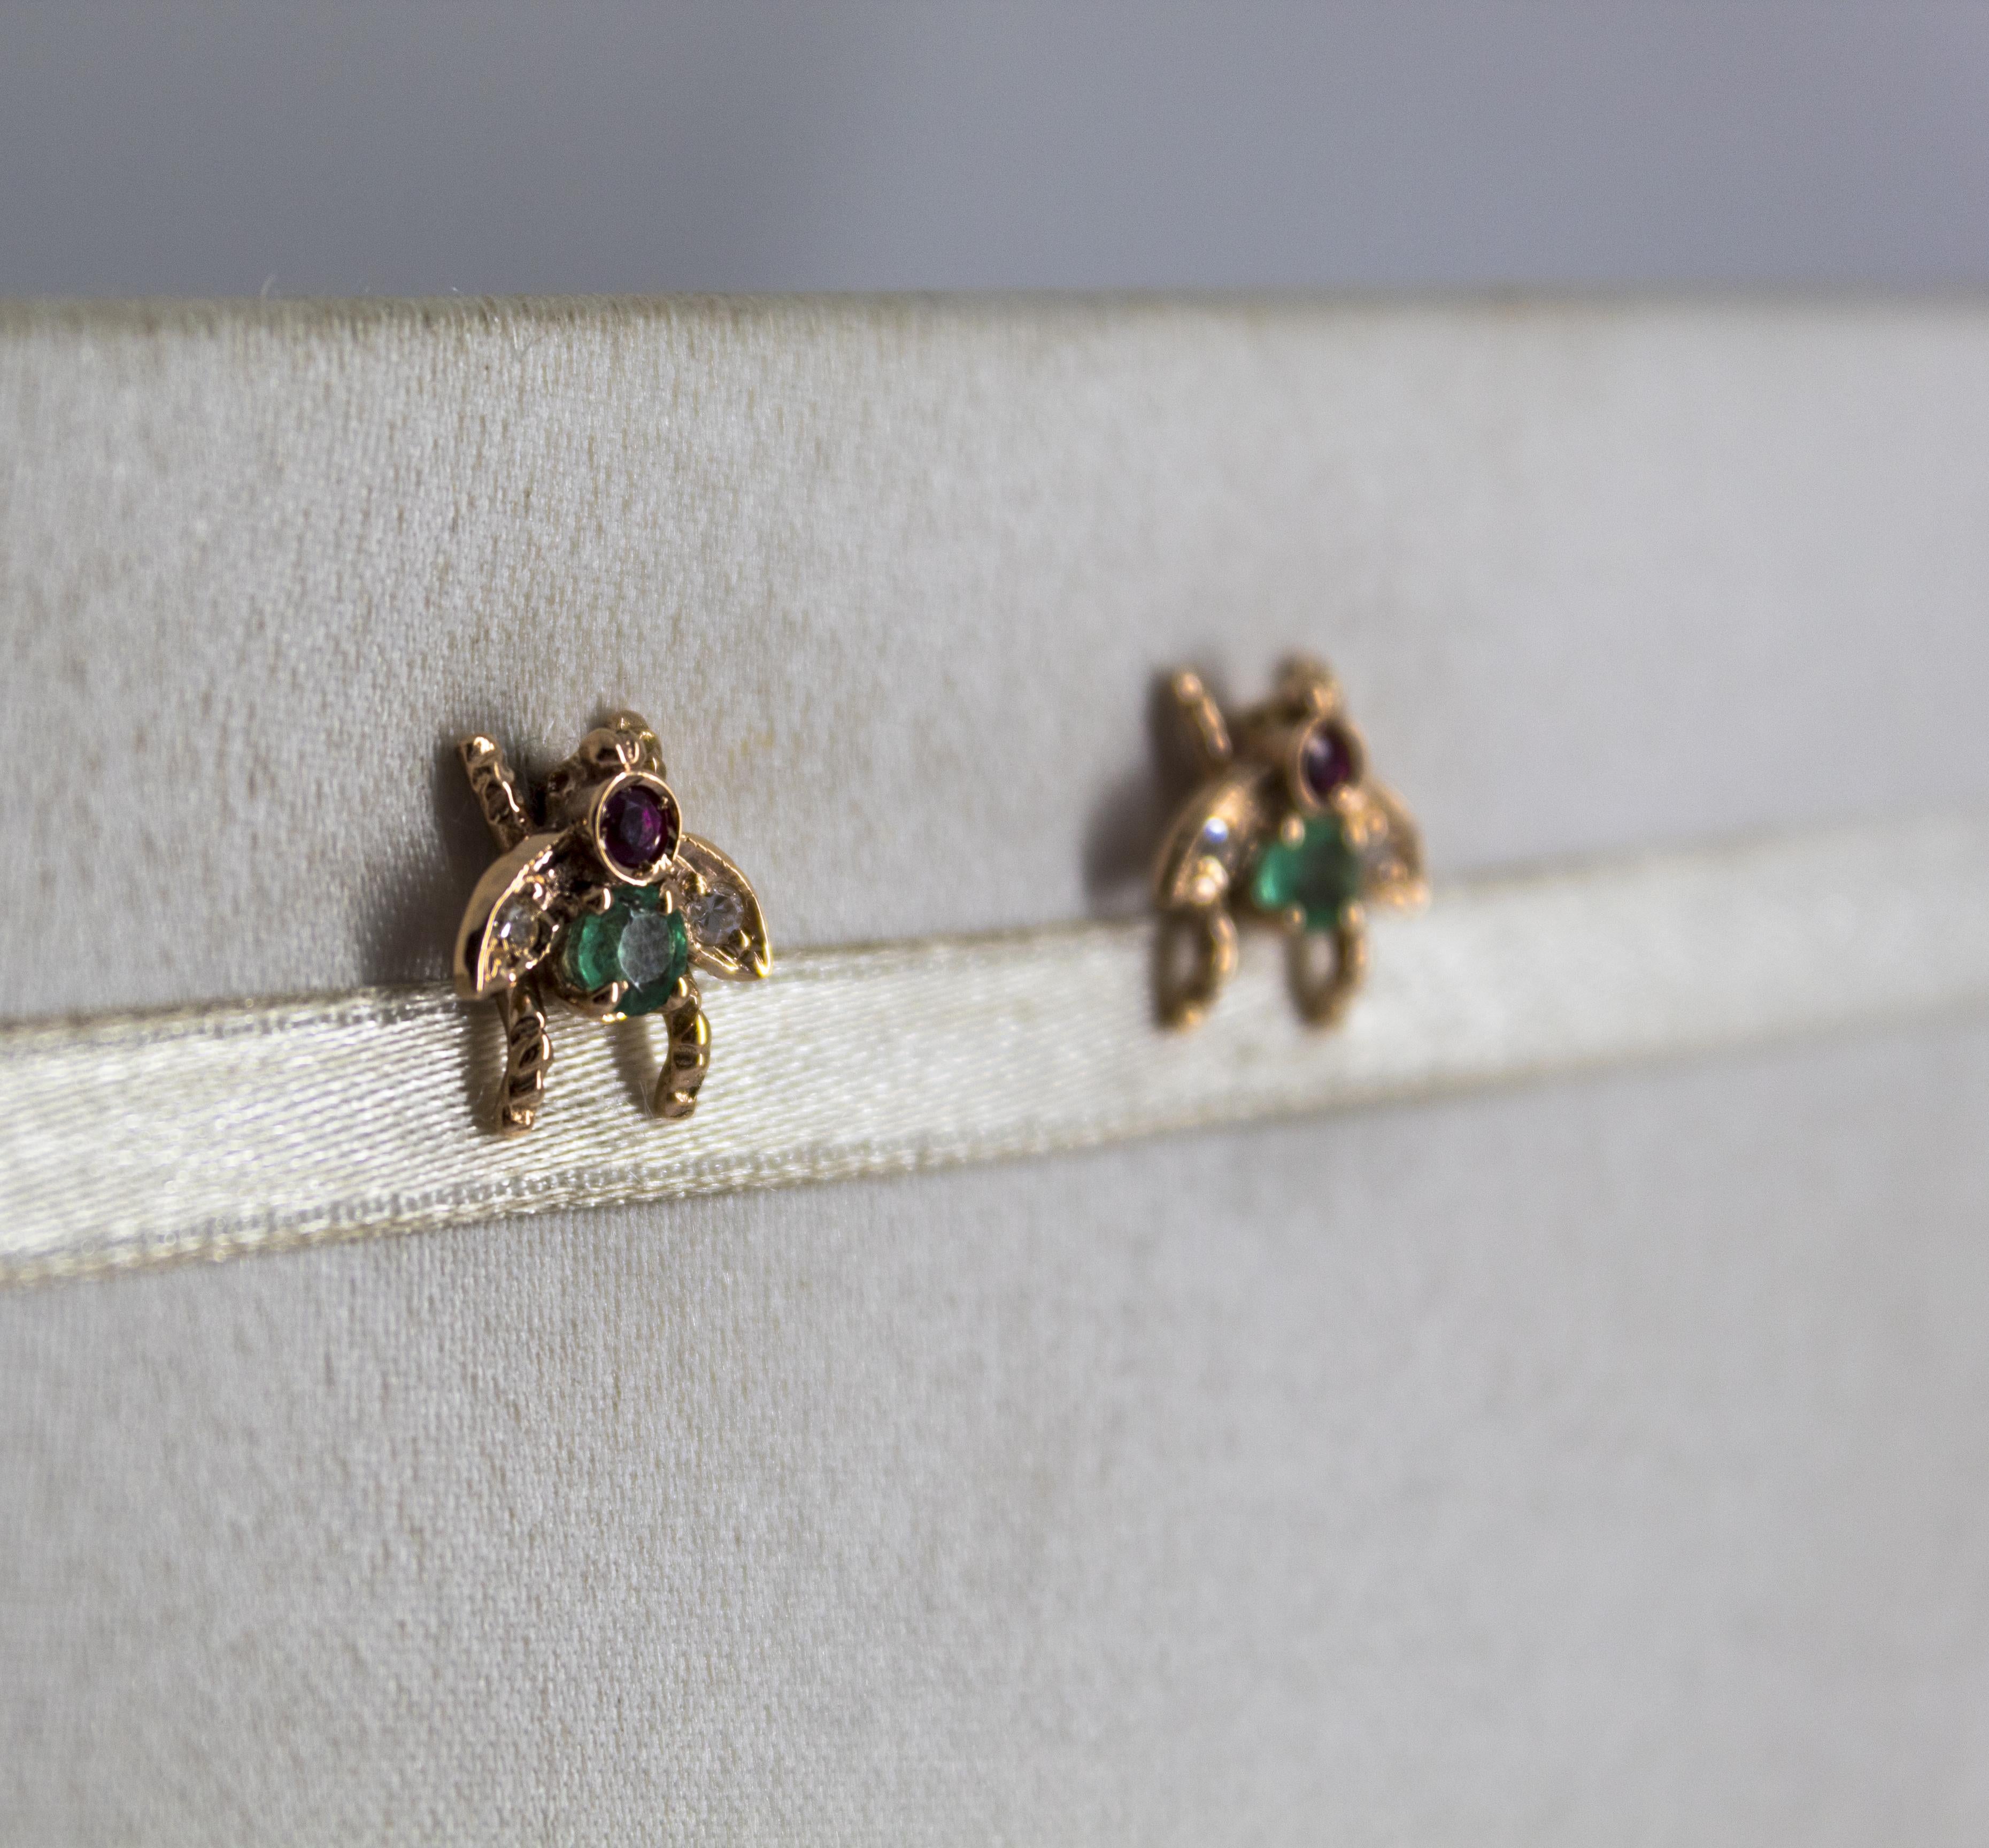 These Stud Earrings are made of 9K Yellow Gold.
These Earrings have 0.08 Carats of White Diamonds.
These Earrings have 0.30 Carats of Emeralds and Rubies.
These Earrings are available also with Blue Sapphires.
We're a workshop so every piece is